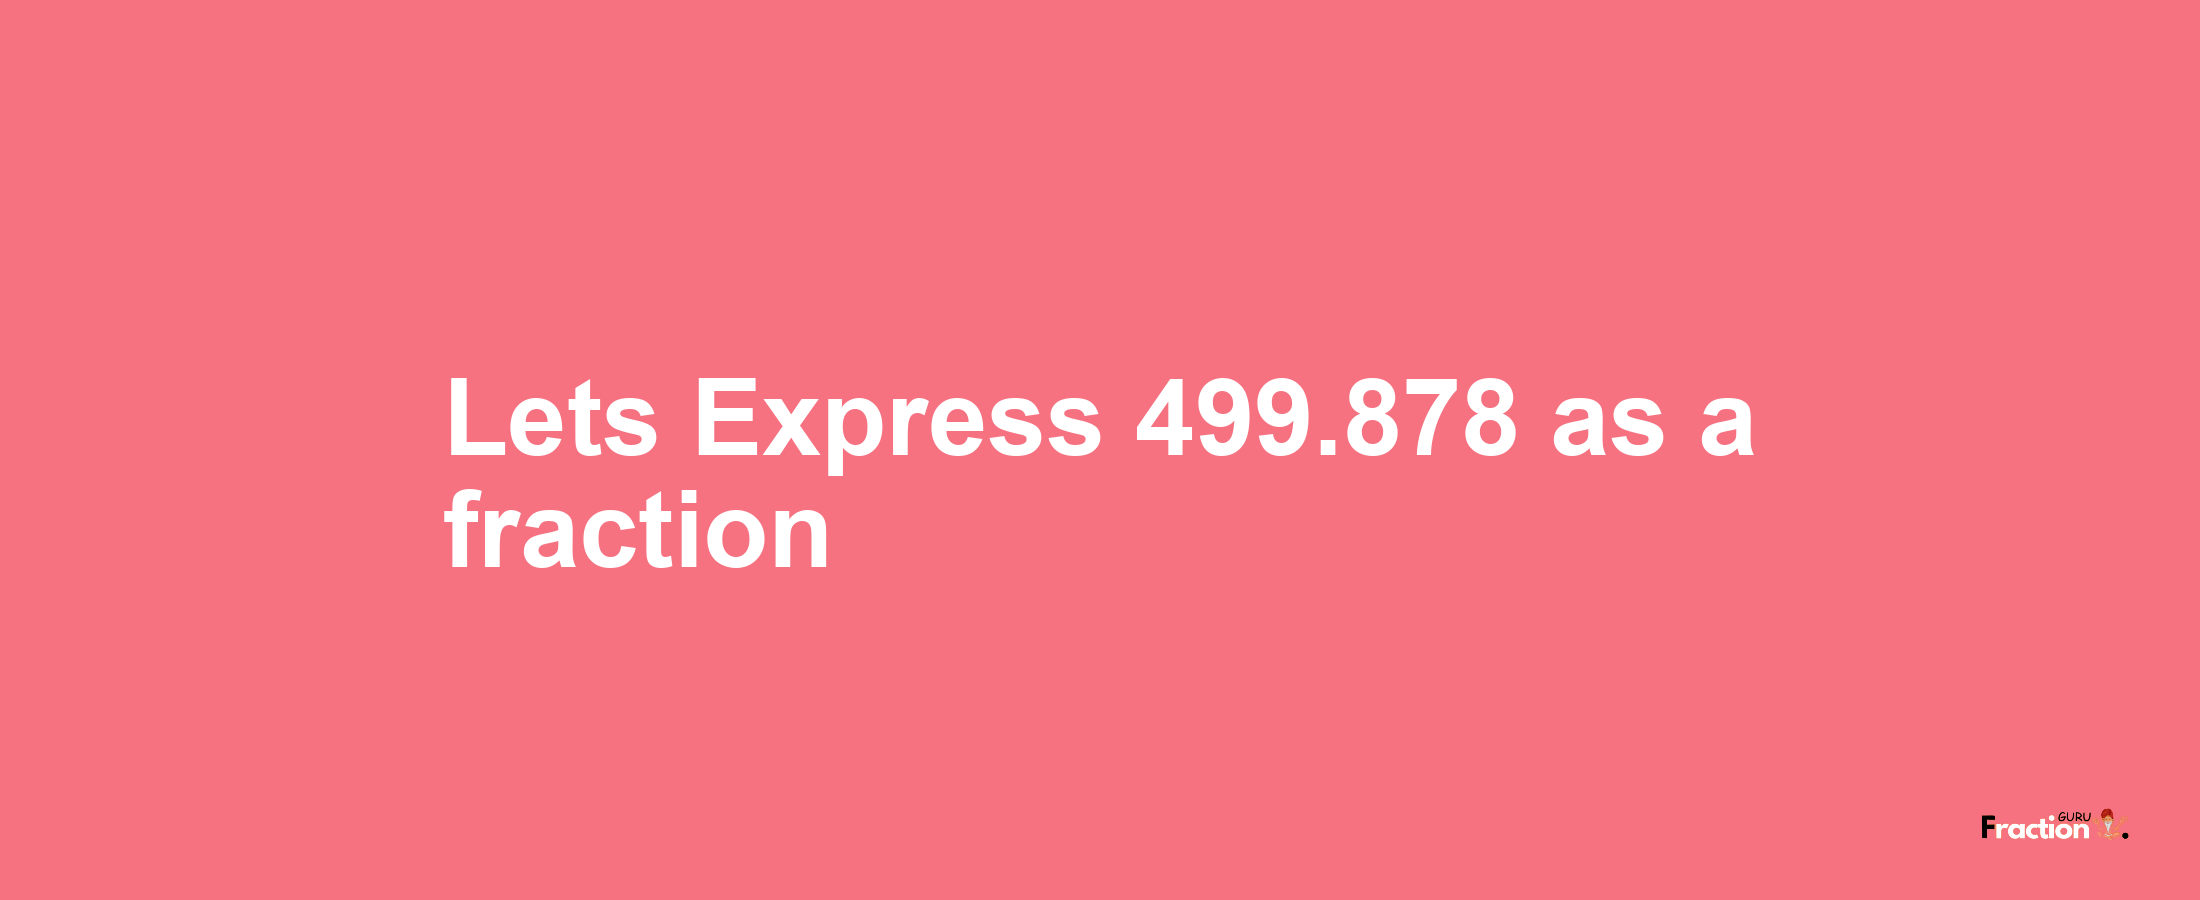 Lets Express 499.878 as afraction